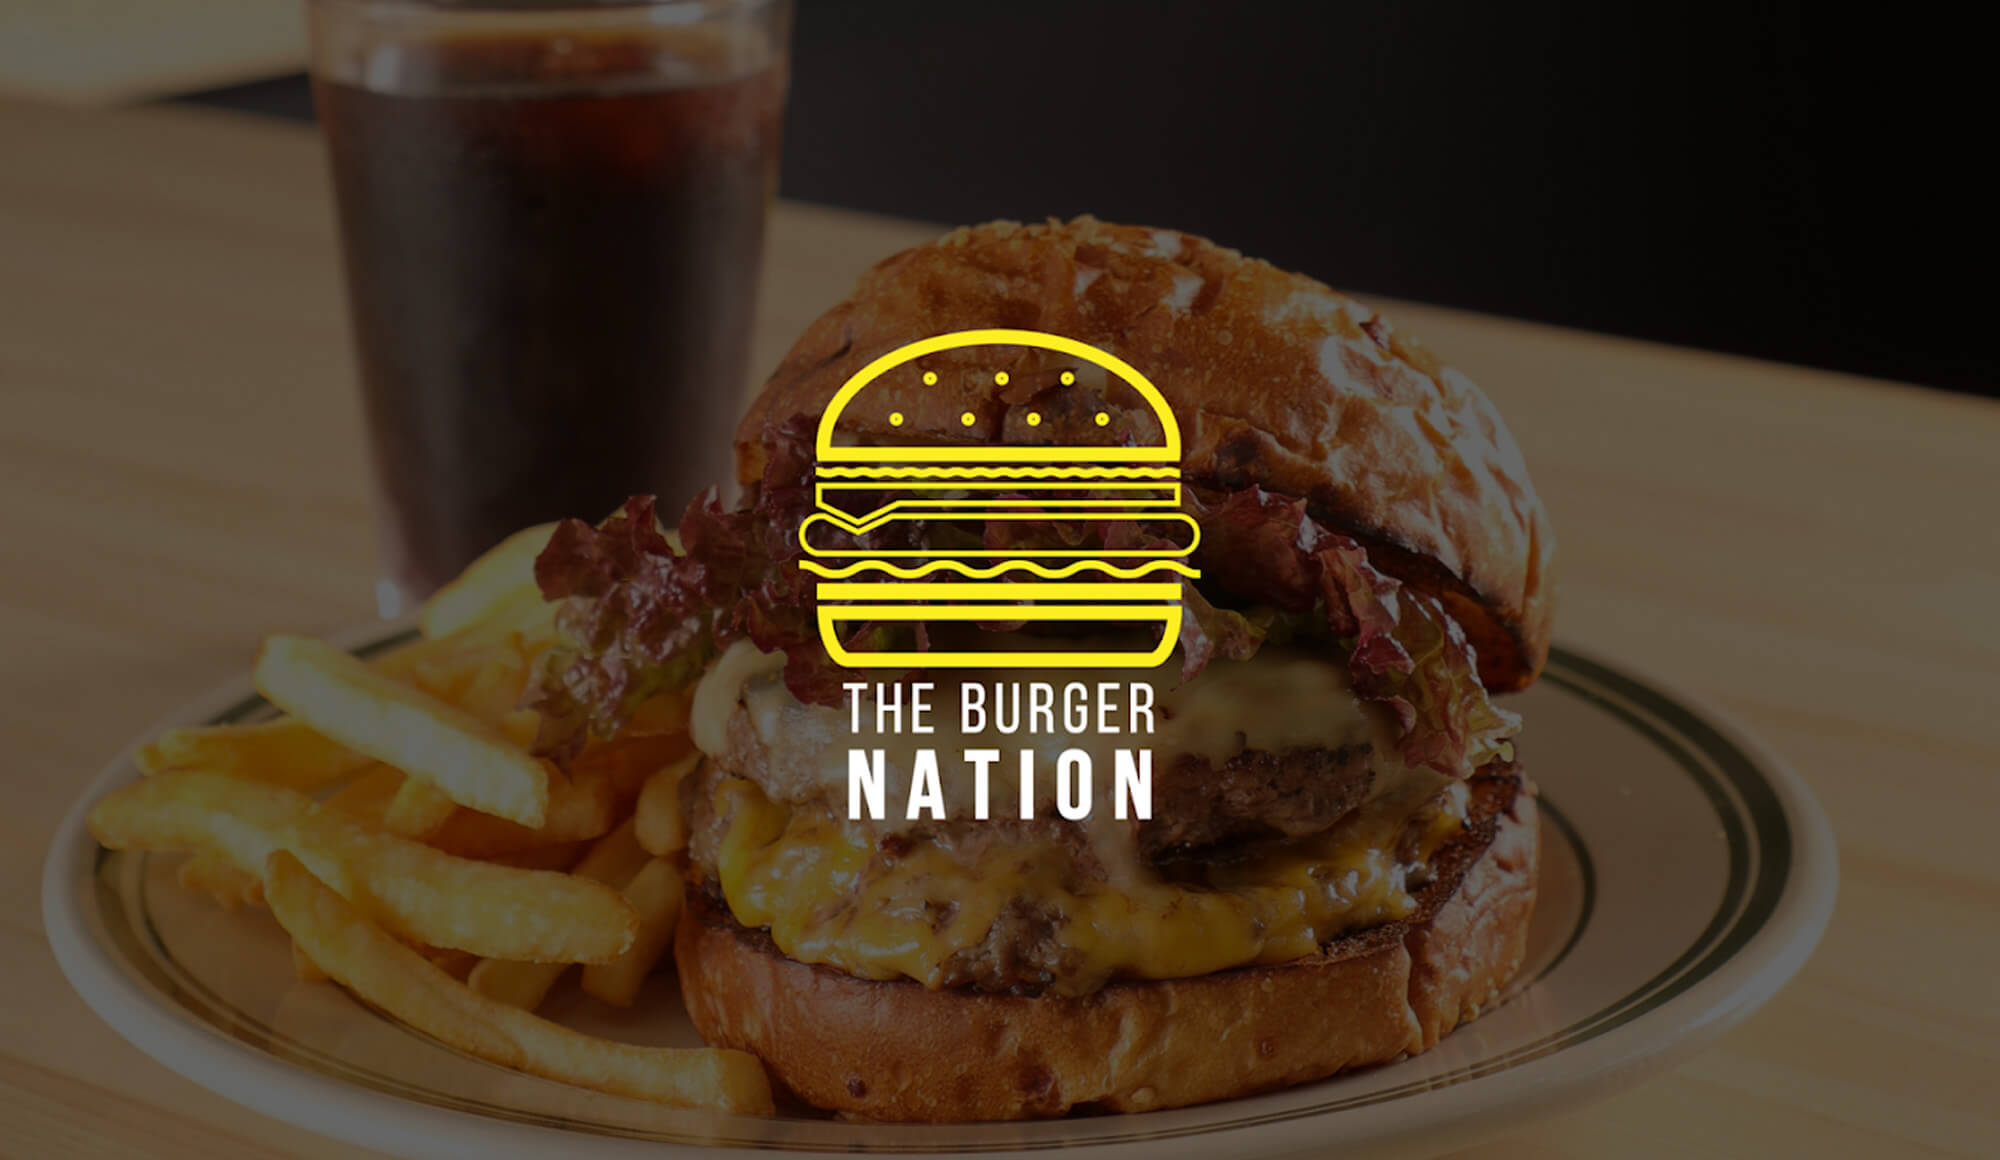 THE BURGER NATION